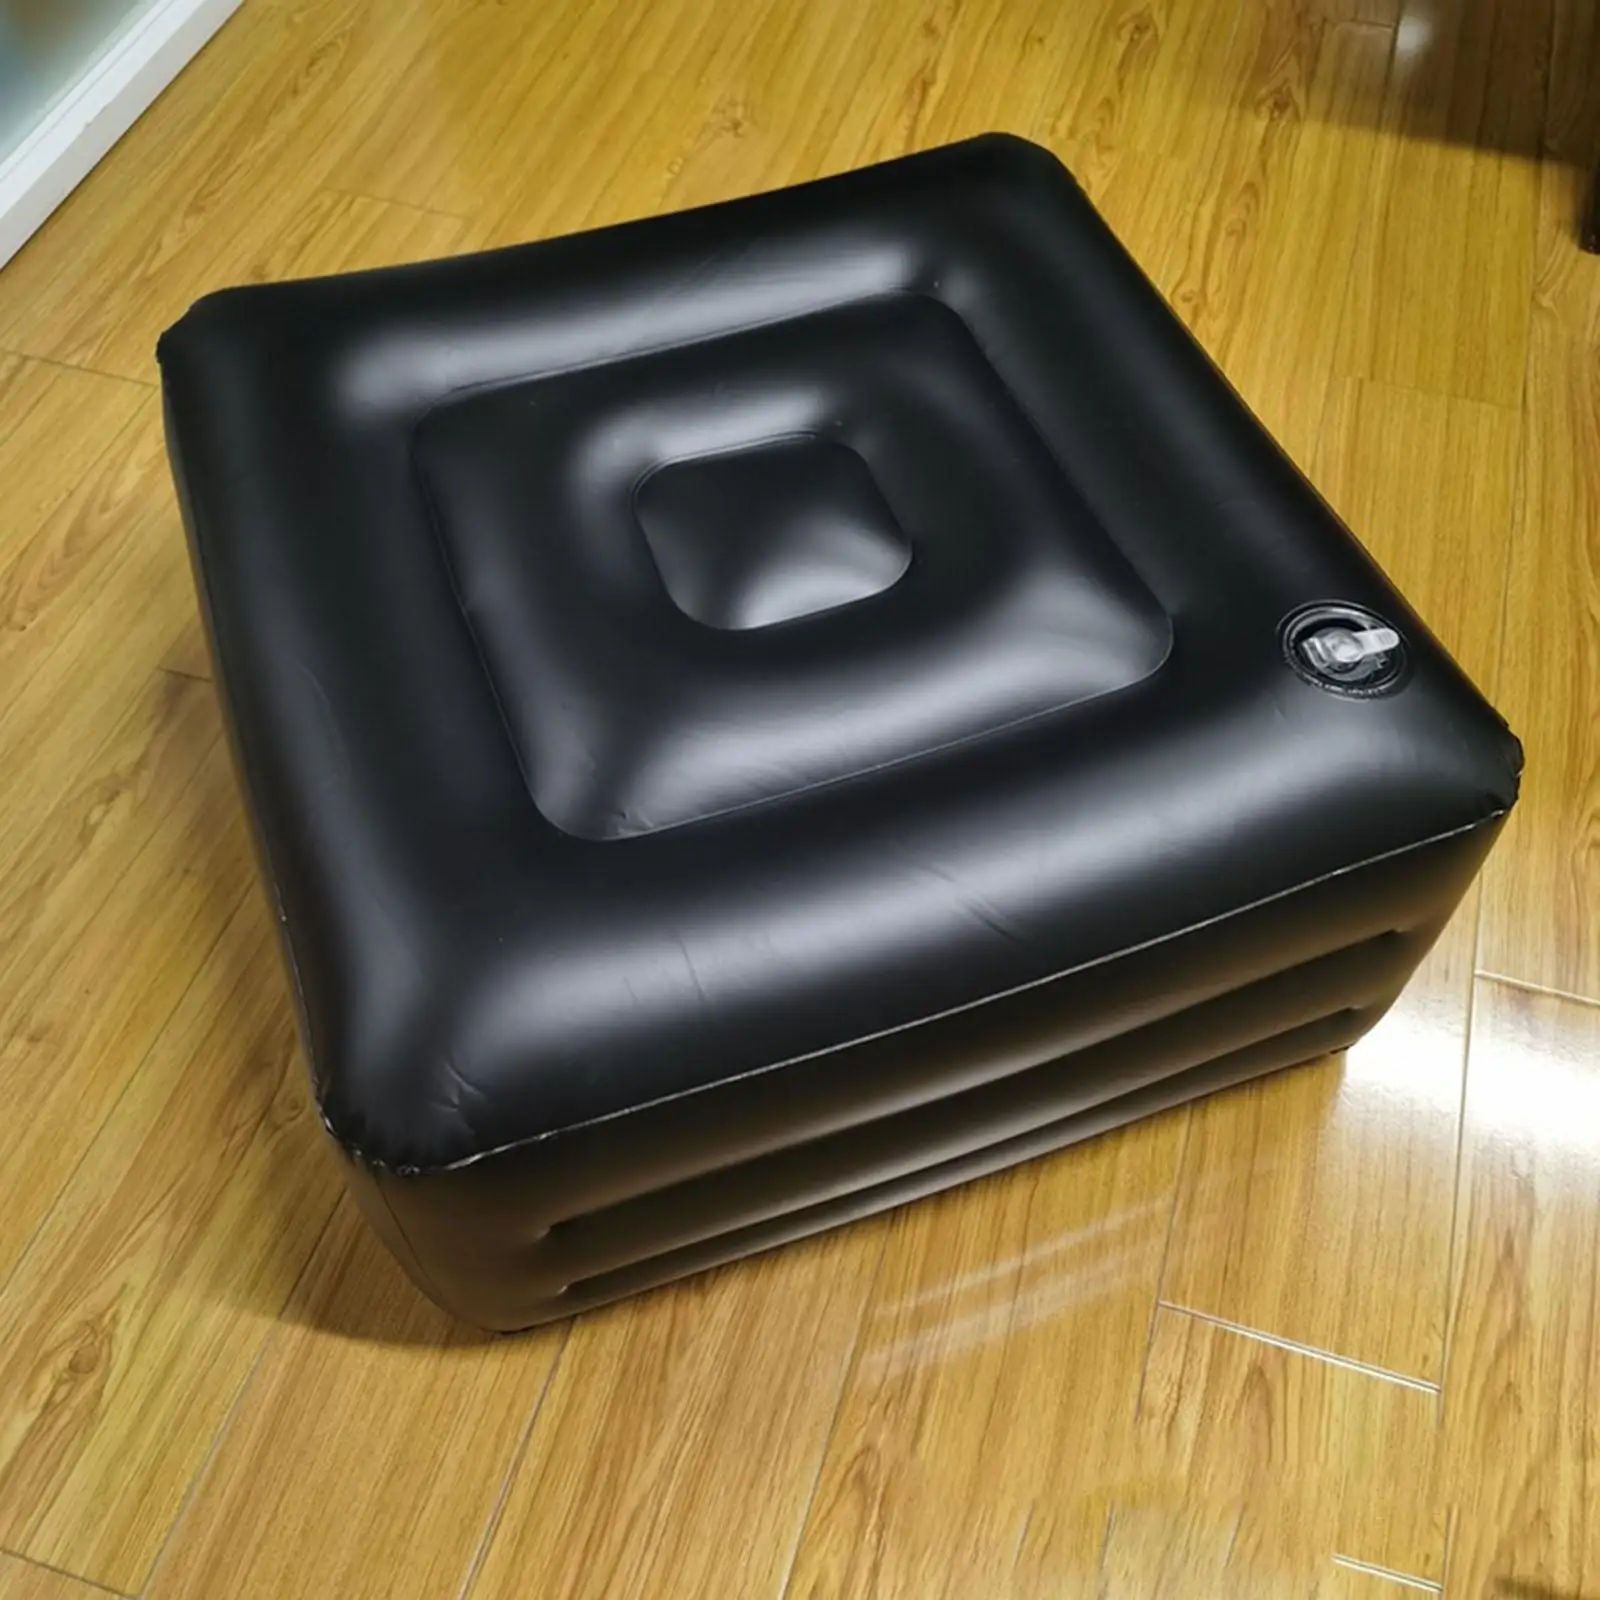 Inflatable Sofa, Stool Durable Adjustable Height, , Small Inflatable Square Stool Chair, for Travel Bedroom Cars Office Adult